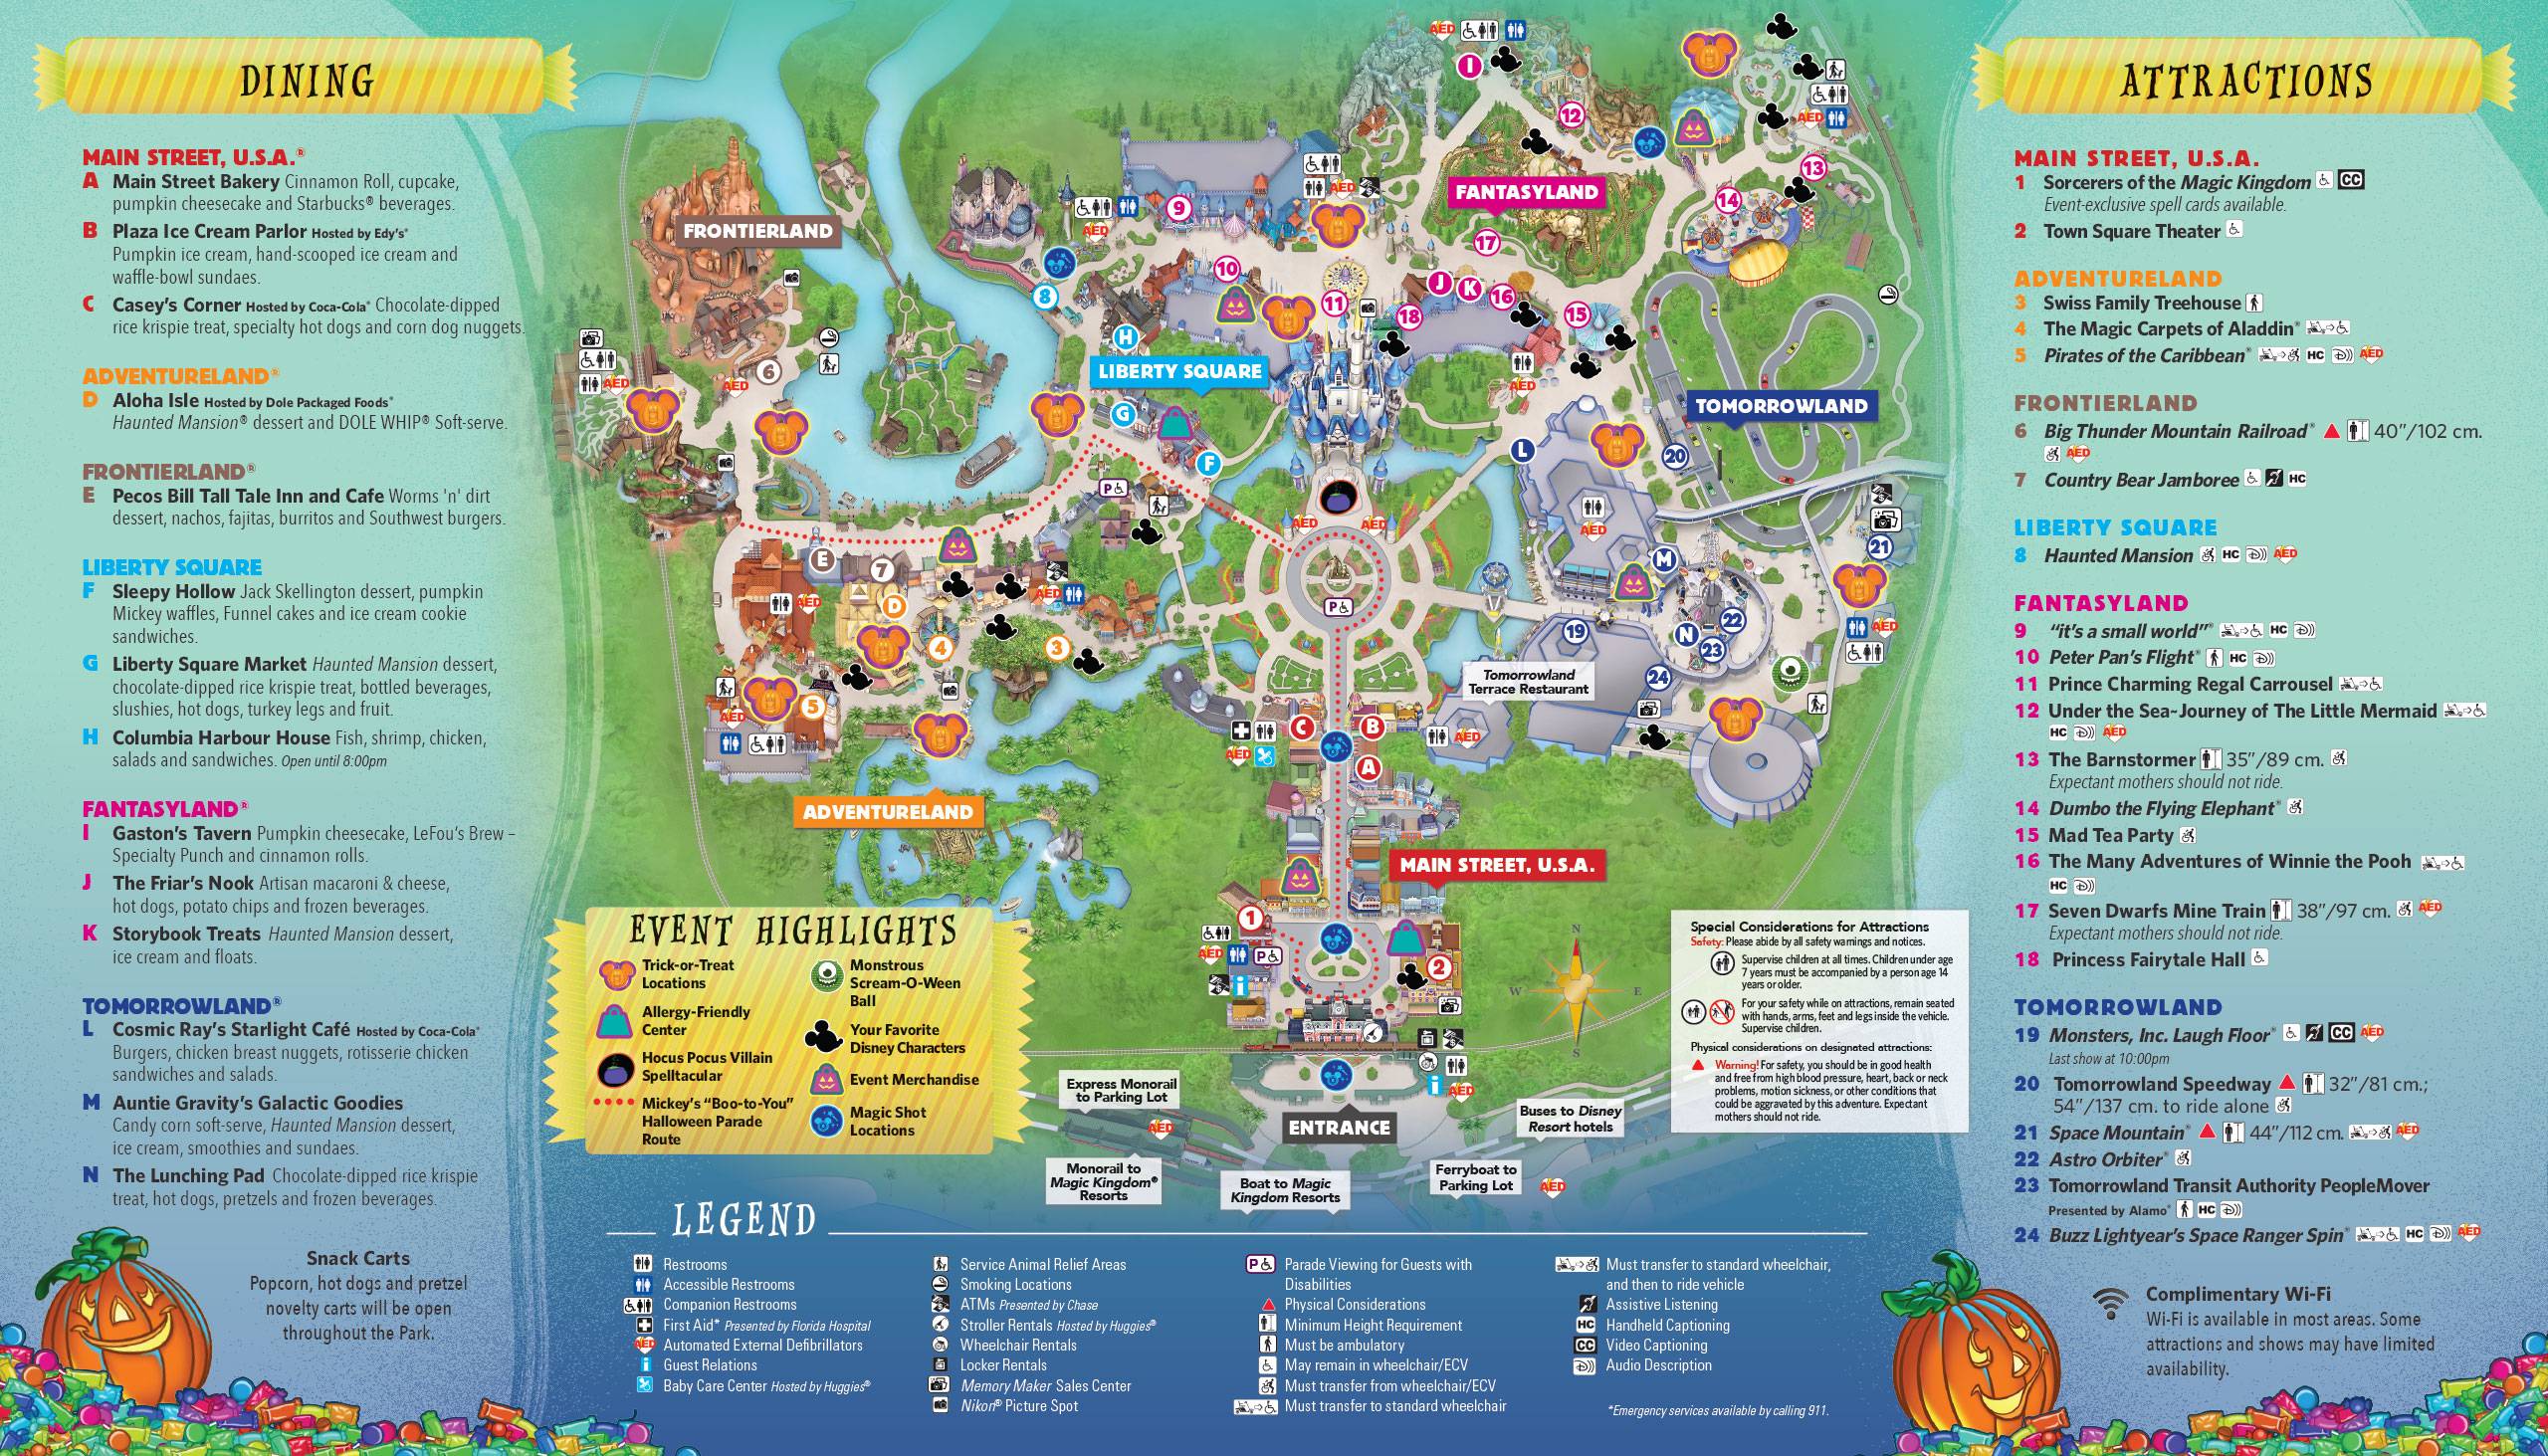 Mickey's Not-So-Scary Halloween Party 2017 guide map